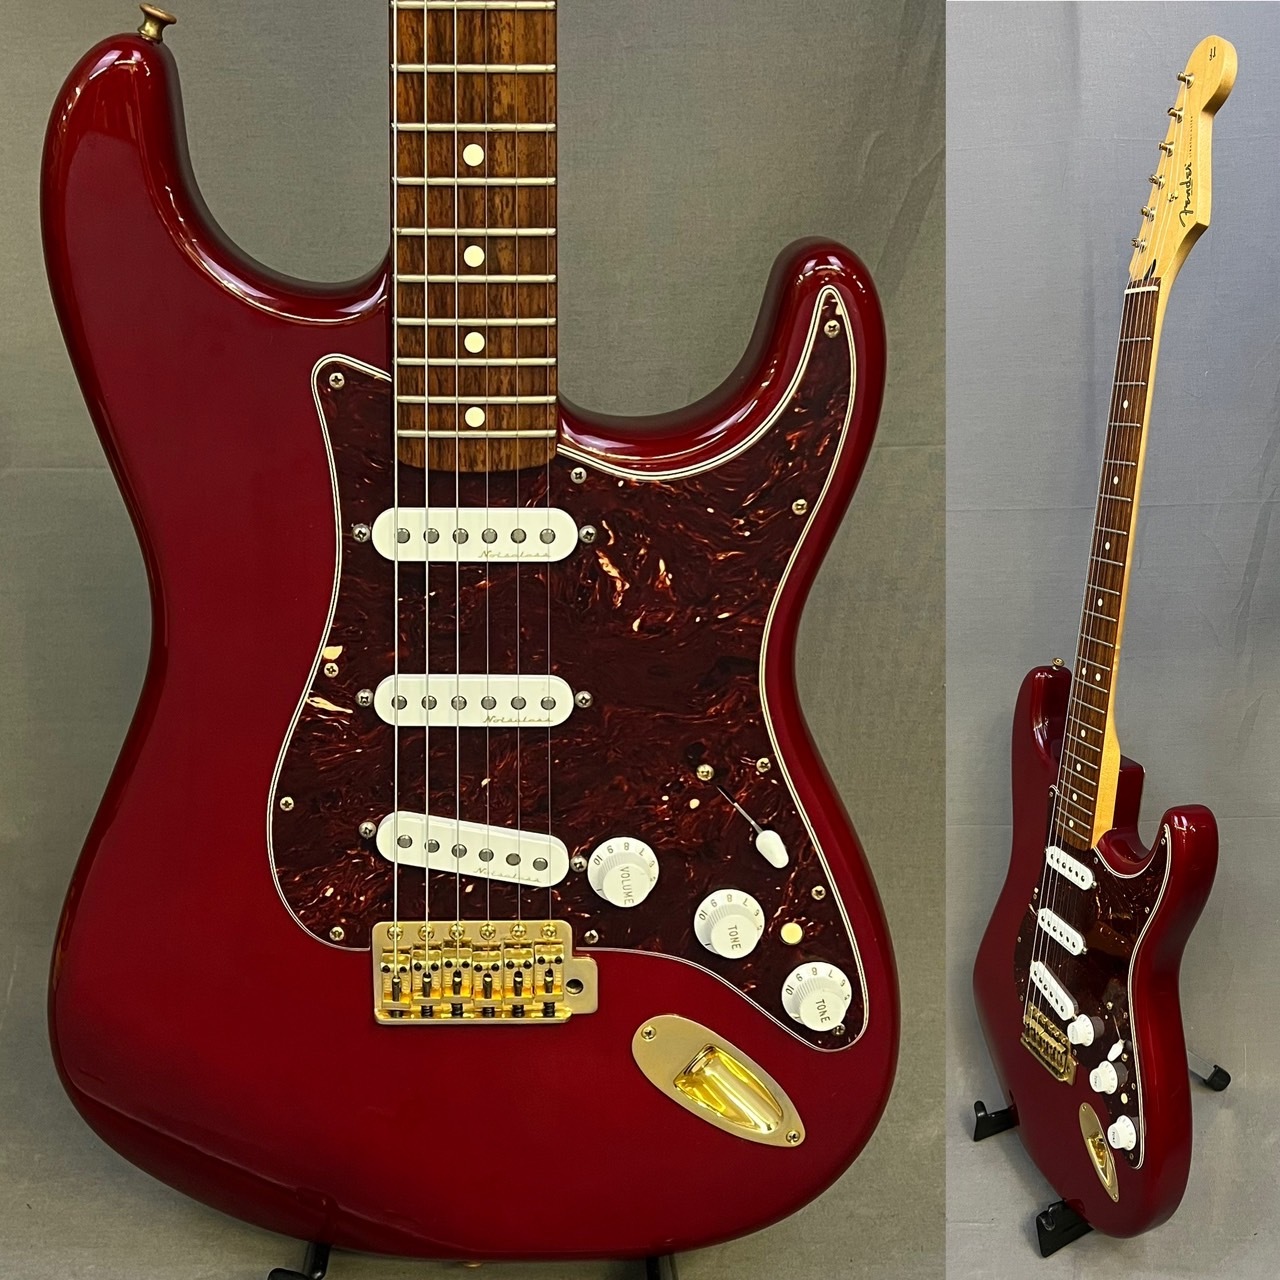 Fender Mexico Deluxe Player Stratocaster 2010年製（中古）【楽器